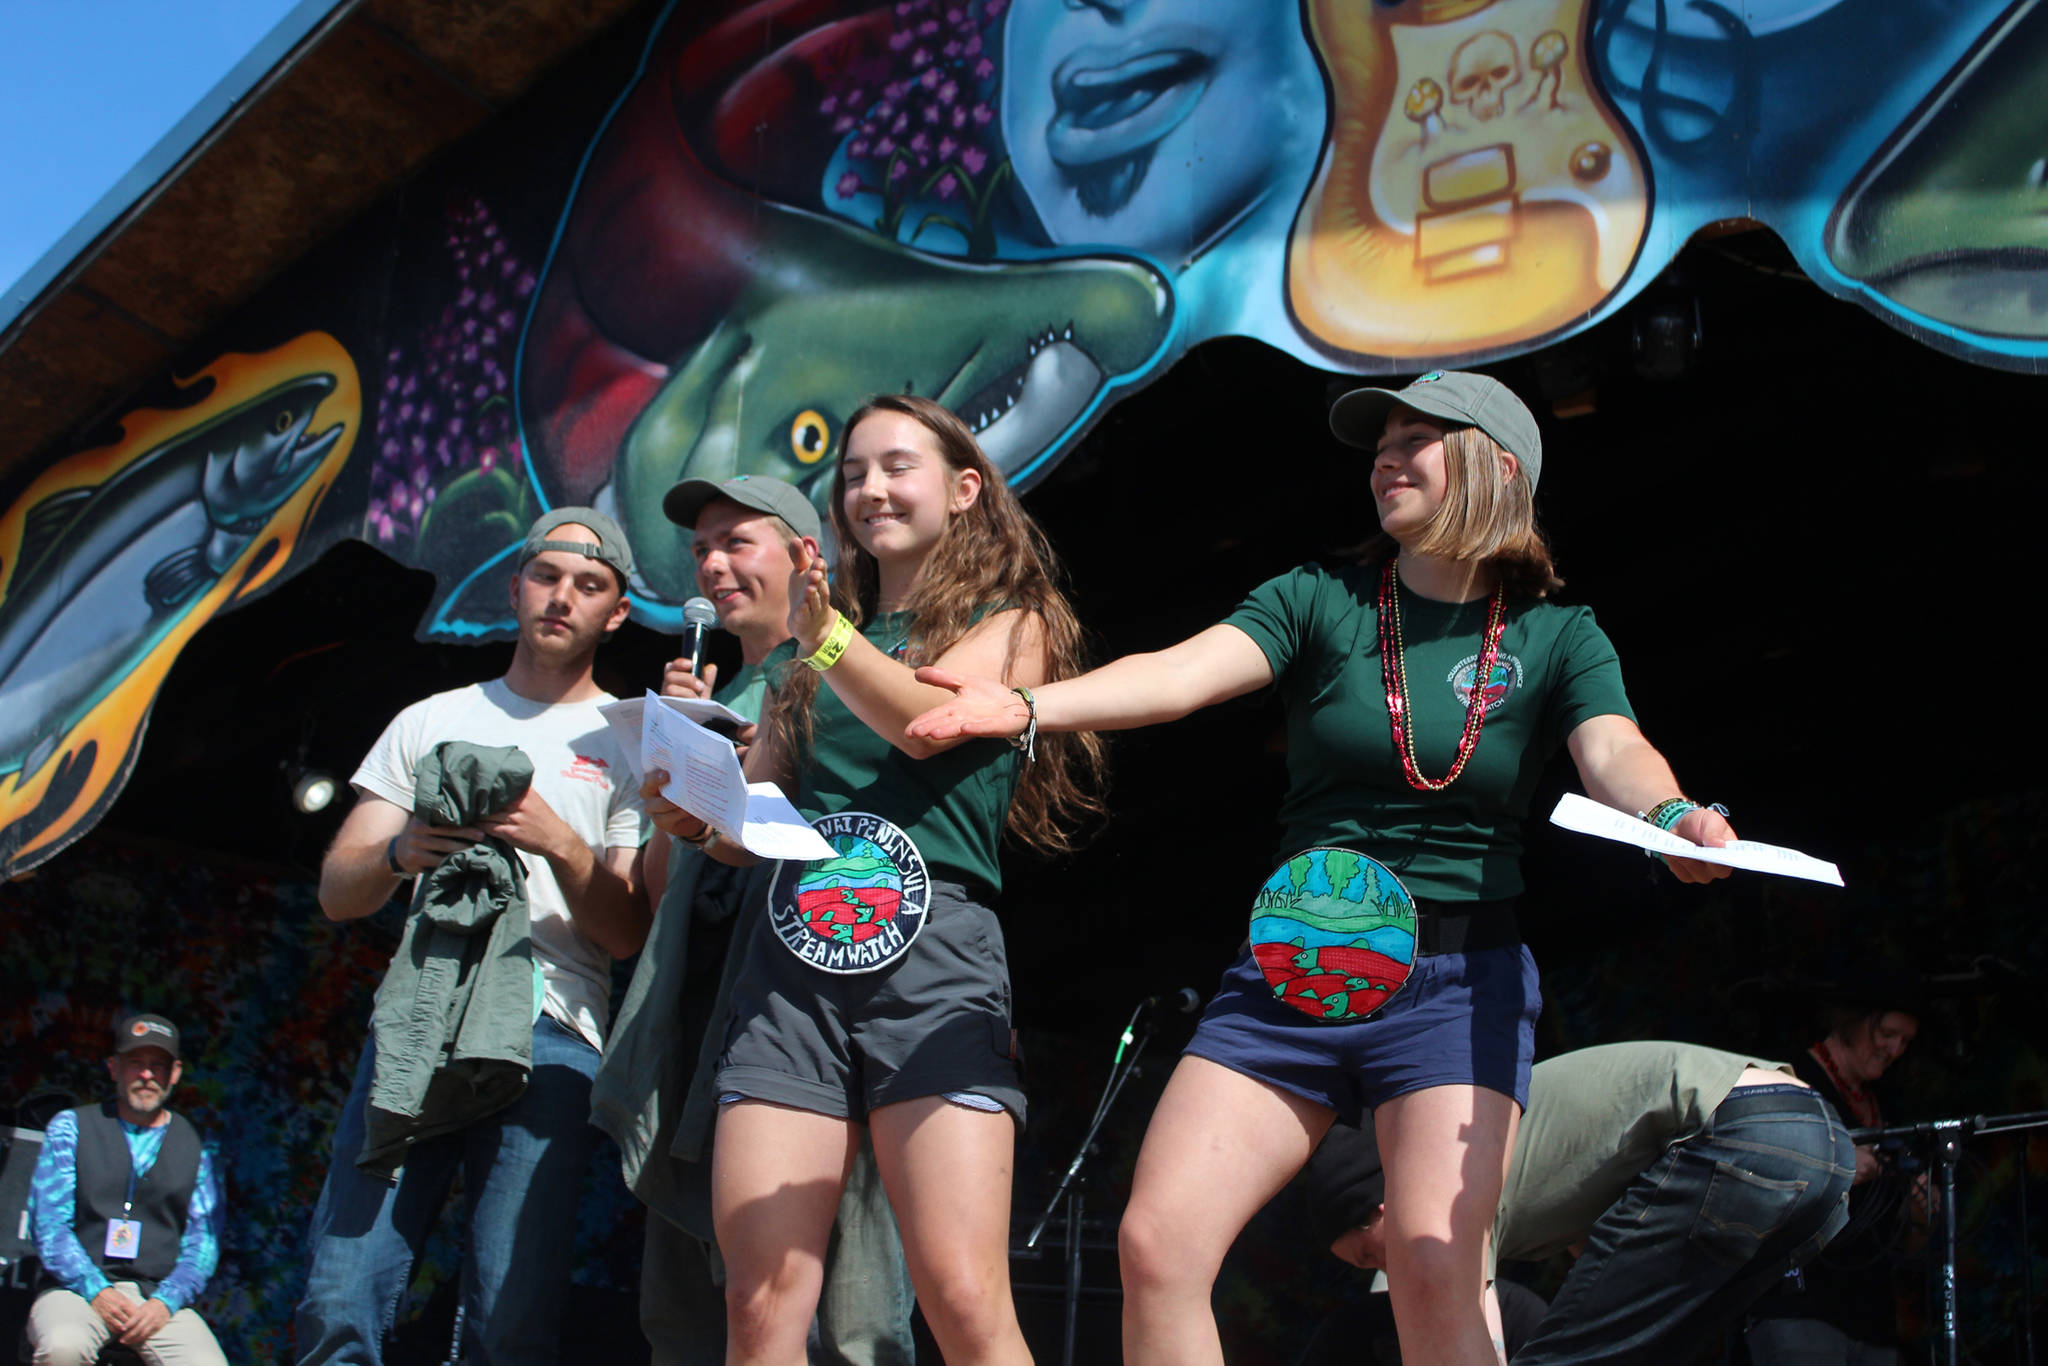 Members of the Kenai Watershed Forum sing an educational tune promoting the Stream Watch program during a break between bands on the Ocean Stage at Salmonfest on Saturday, Aug. 4, 2018 at the Kenai Peninsula Fairgrounds in Ninilchik, Alaska. (Photo by Megan Pacer/Homer News)